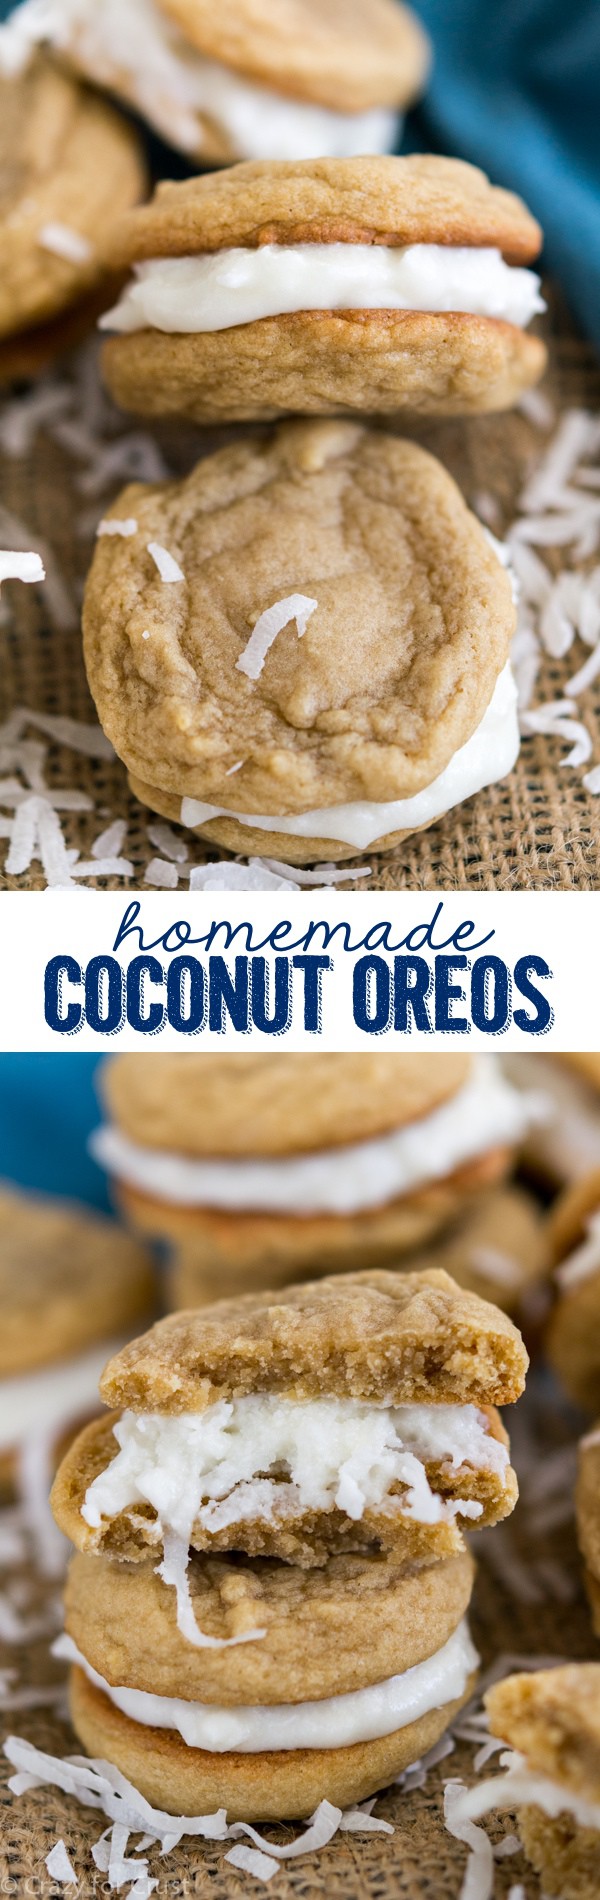 Homemade Coconut Oreos completely from scratch! Like a Golden Oreo copycat filled with coconut cream. They're easy to make at home!